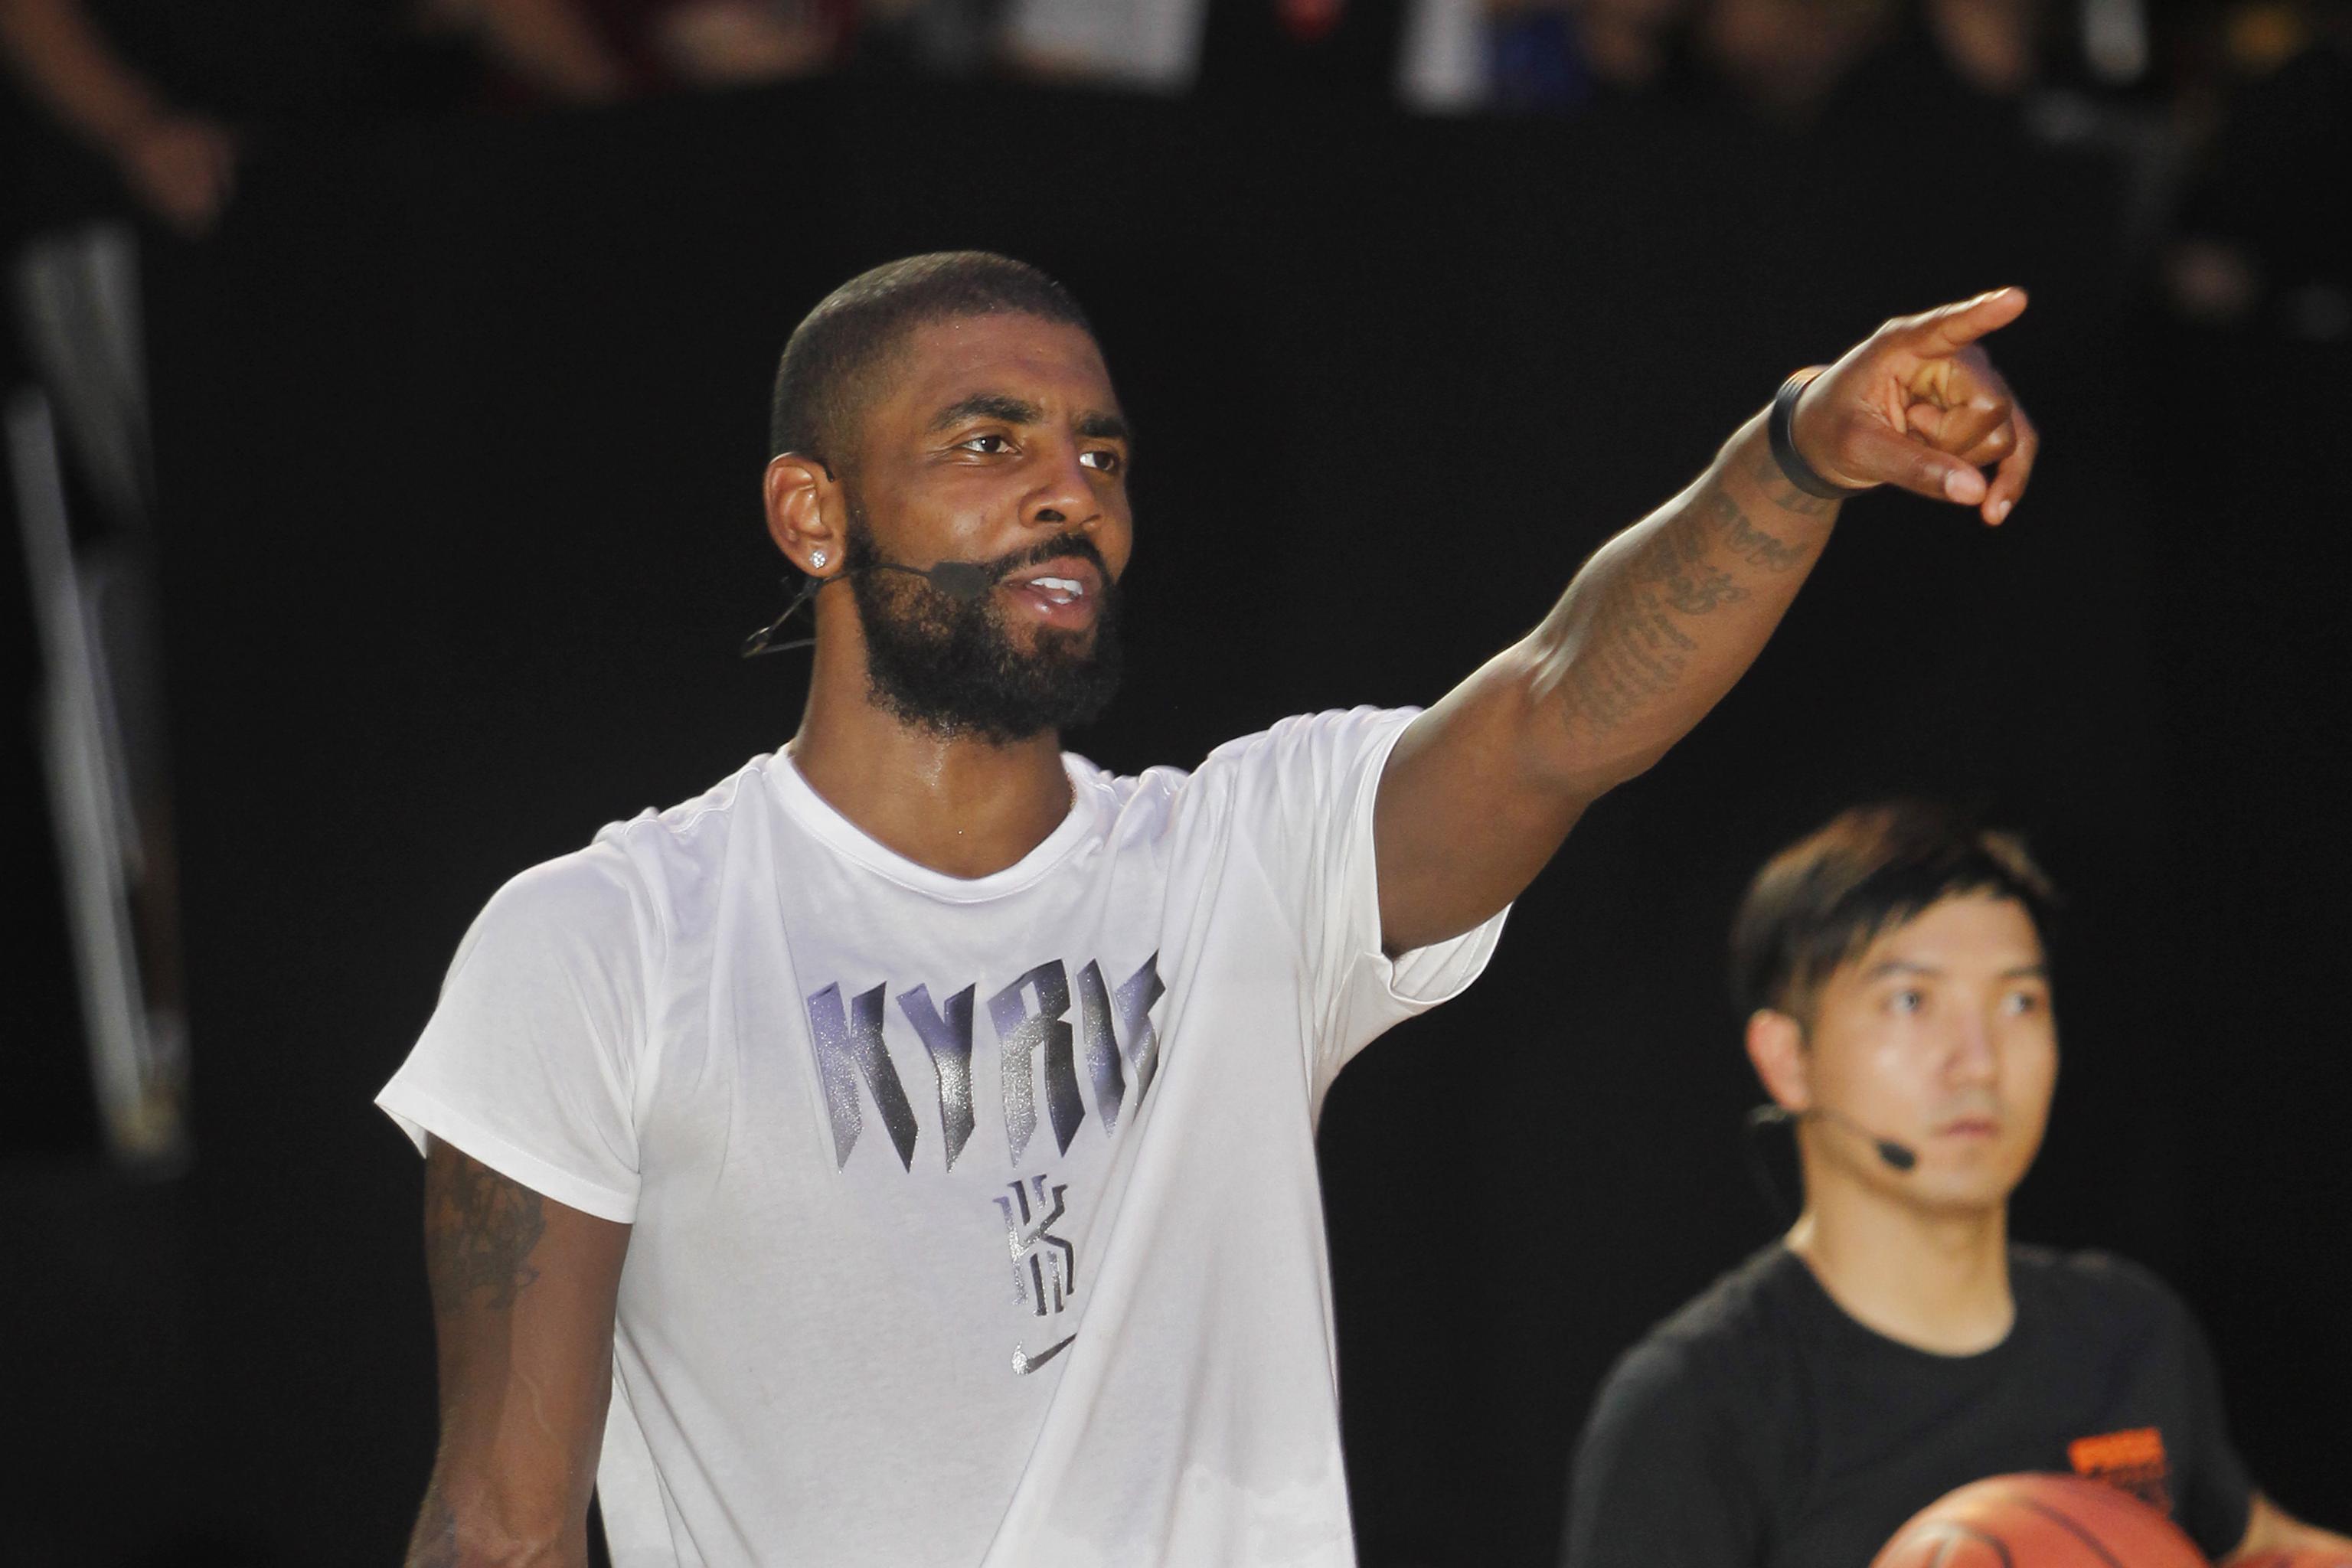 Red Sox minor-league team hosting 'Kyrie Irving Night,' and LeBron James is  not welcome